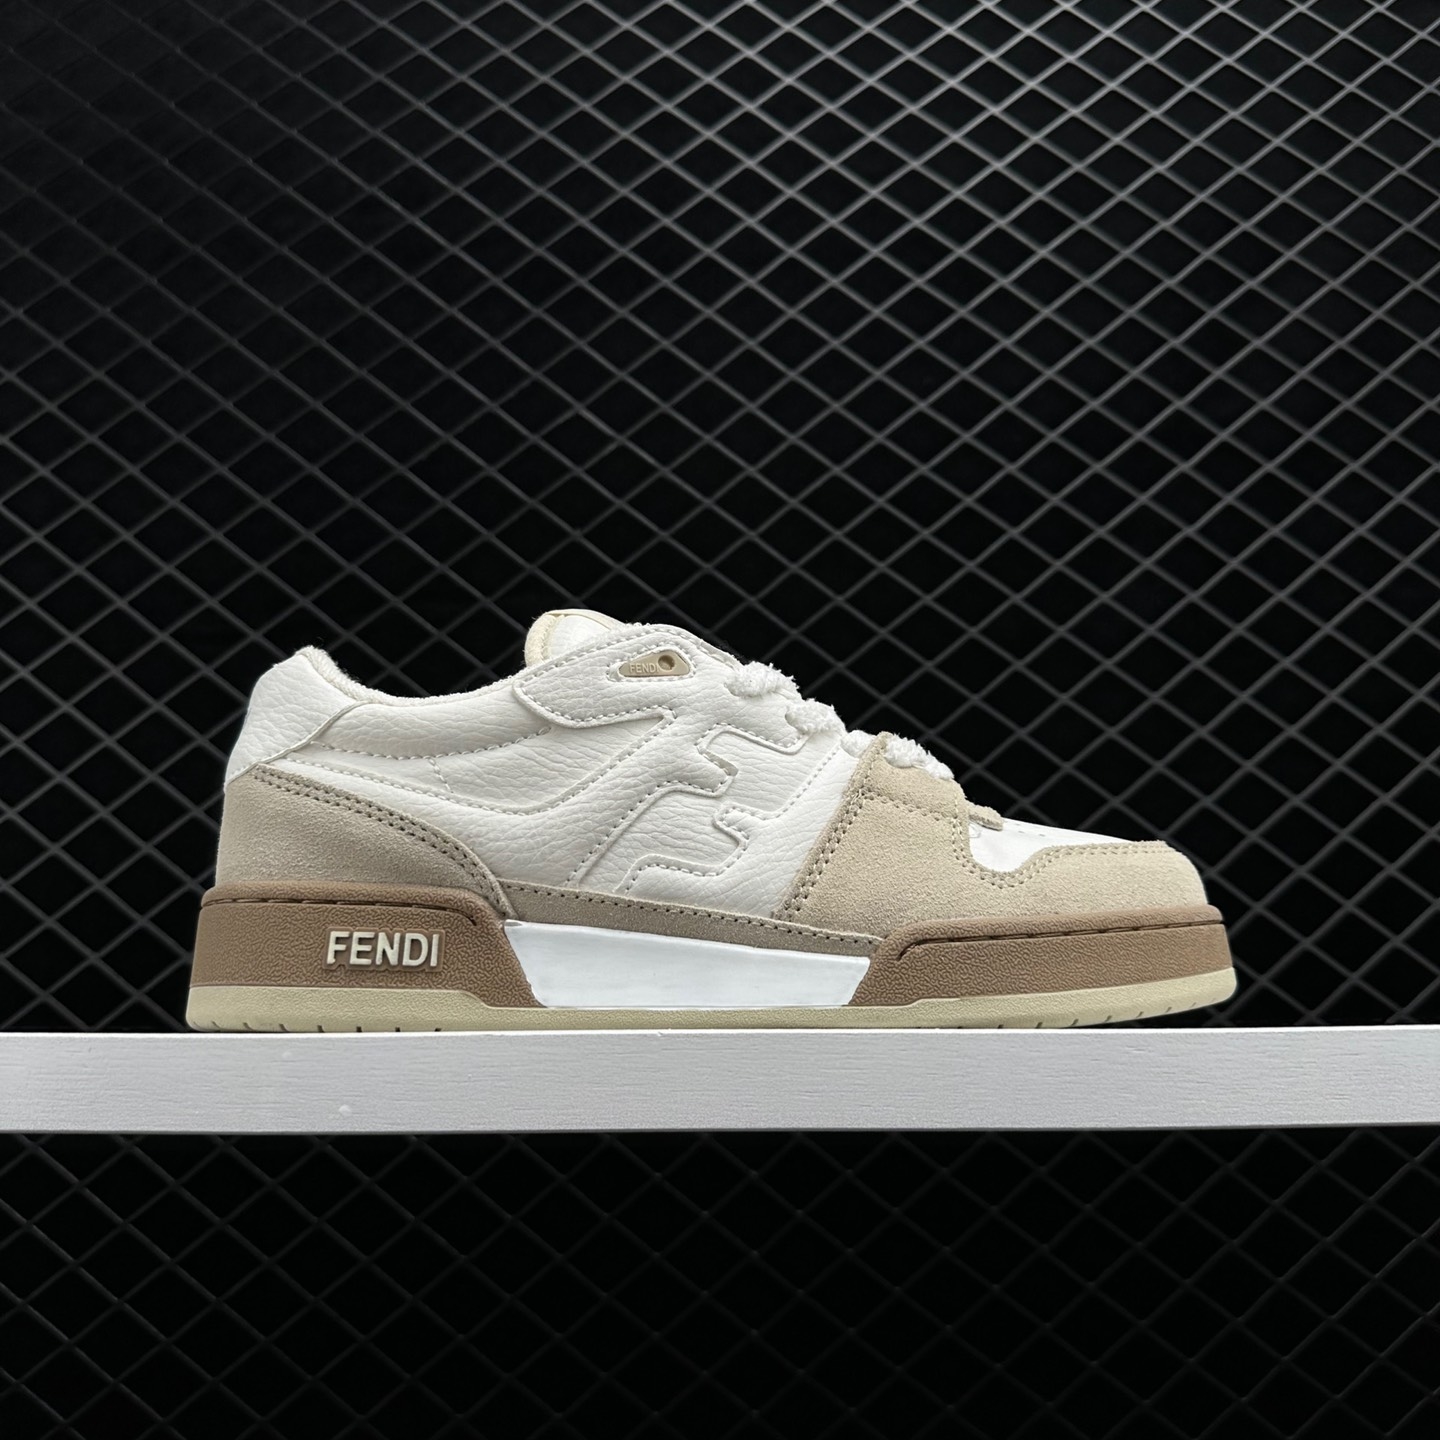 Fendi Match Leather White: Luxe Style for Any Occasion!